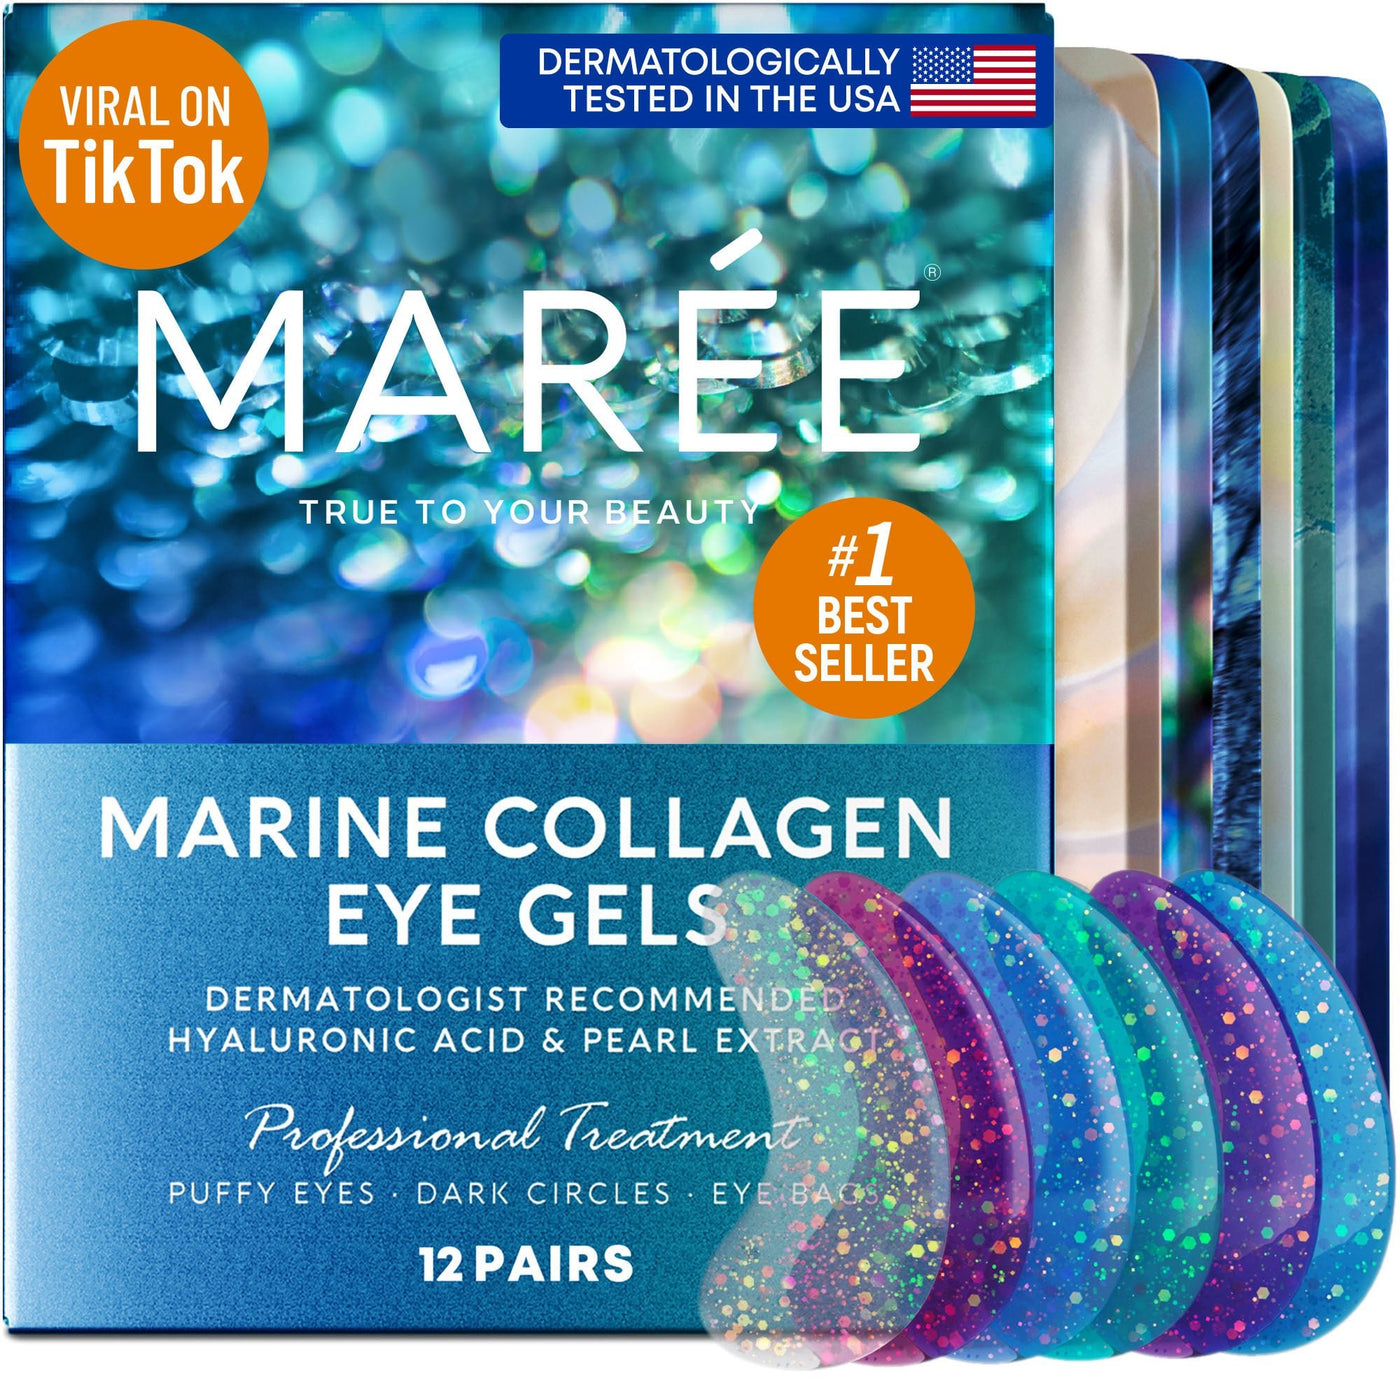 Marée Eye Gels Are Made With Real Marine Collagen — $10 Off